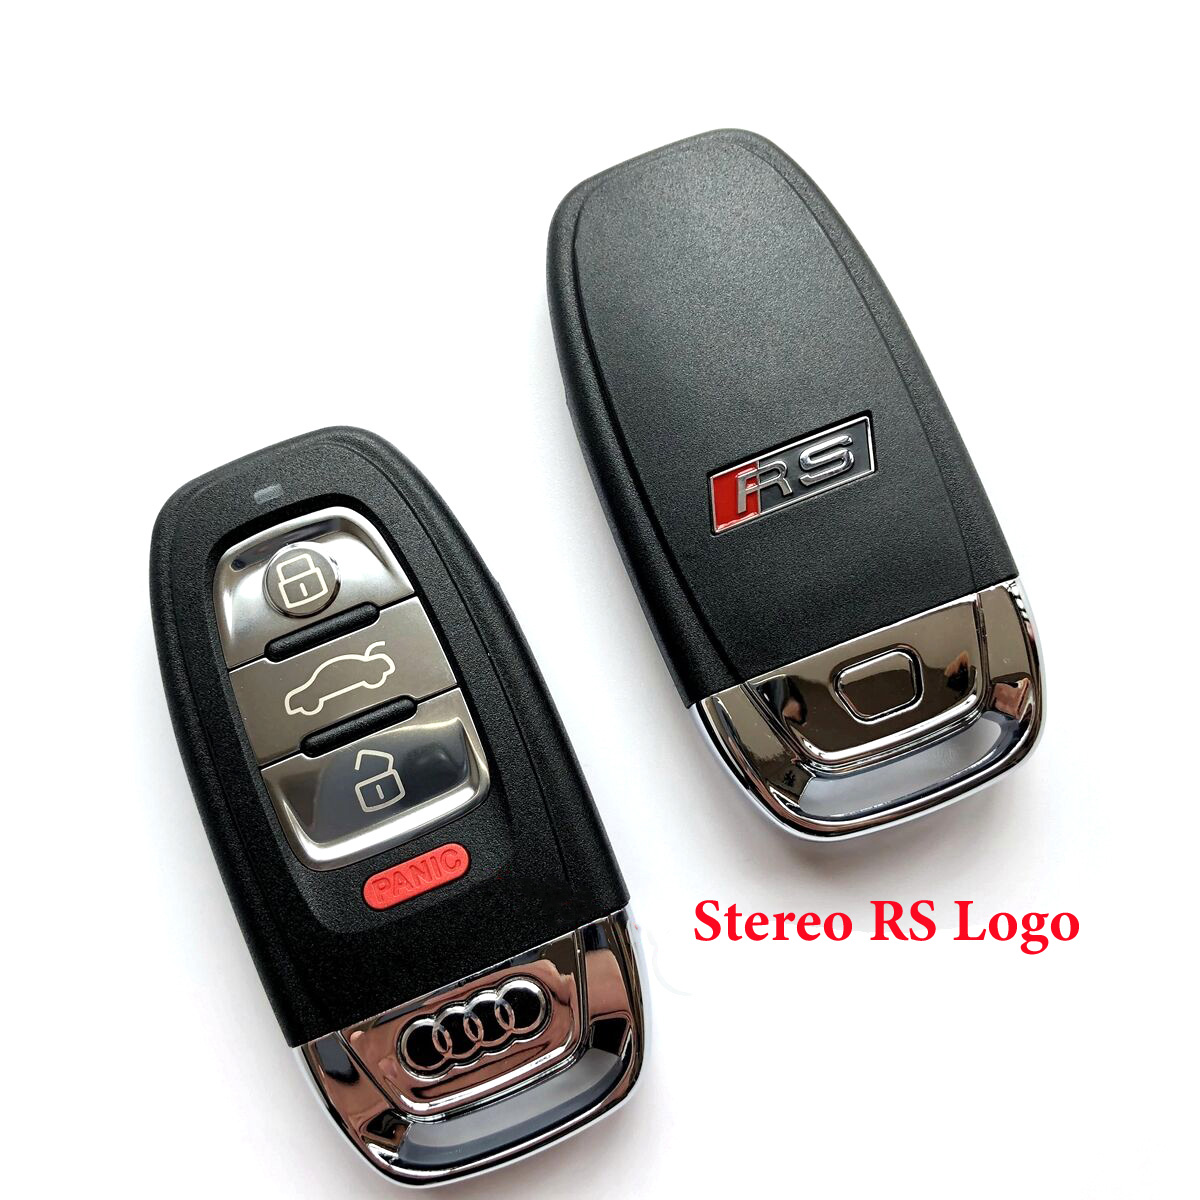 Top Quality Fob Replacement 4 Buttons for Audi RS Remote Key Shell with Stereo RS Logo - pack of 5